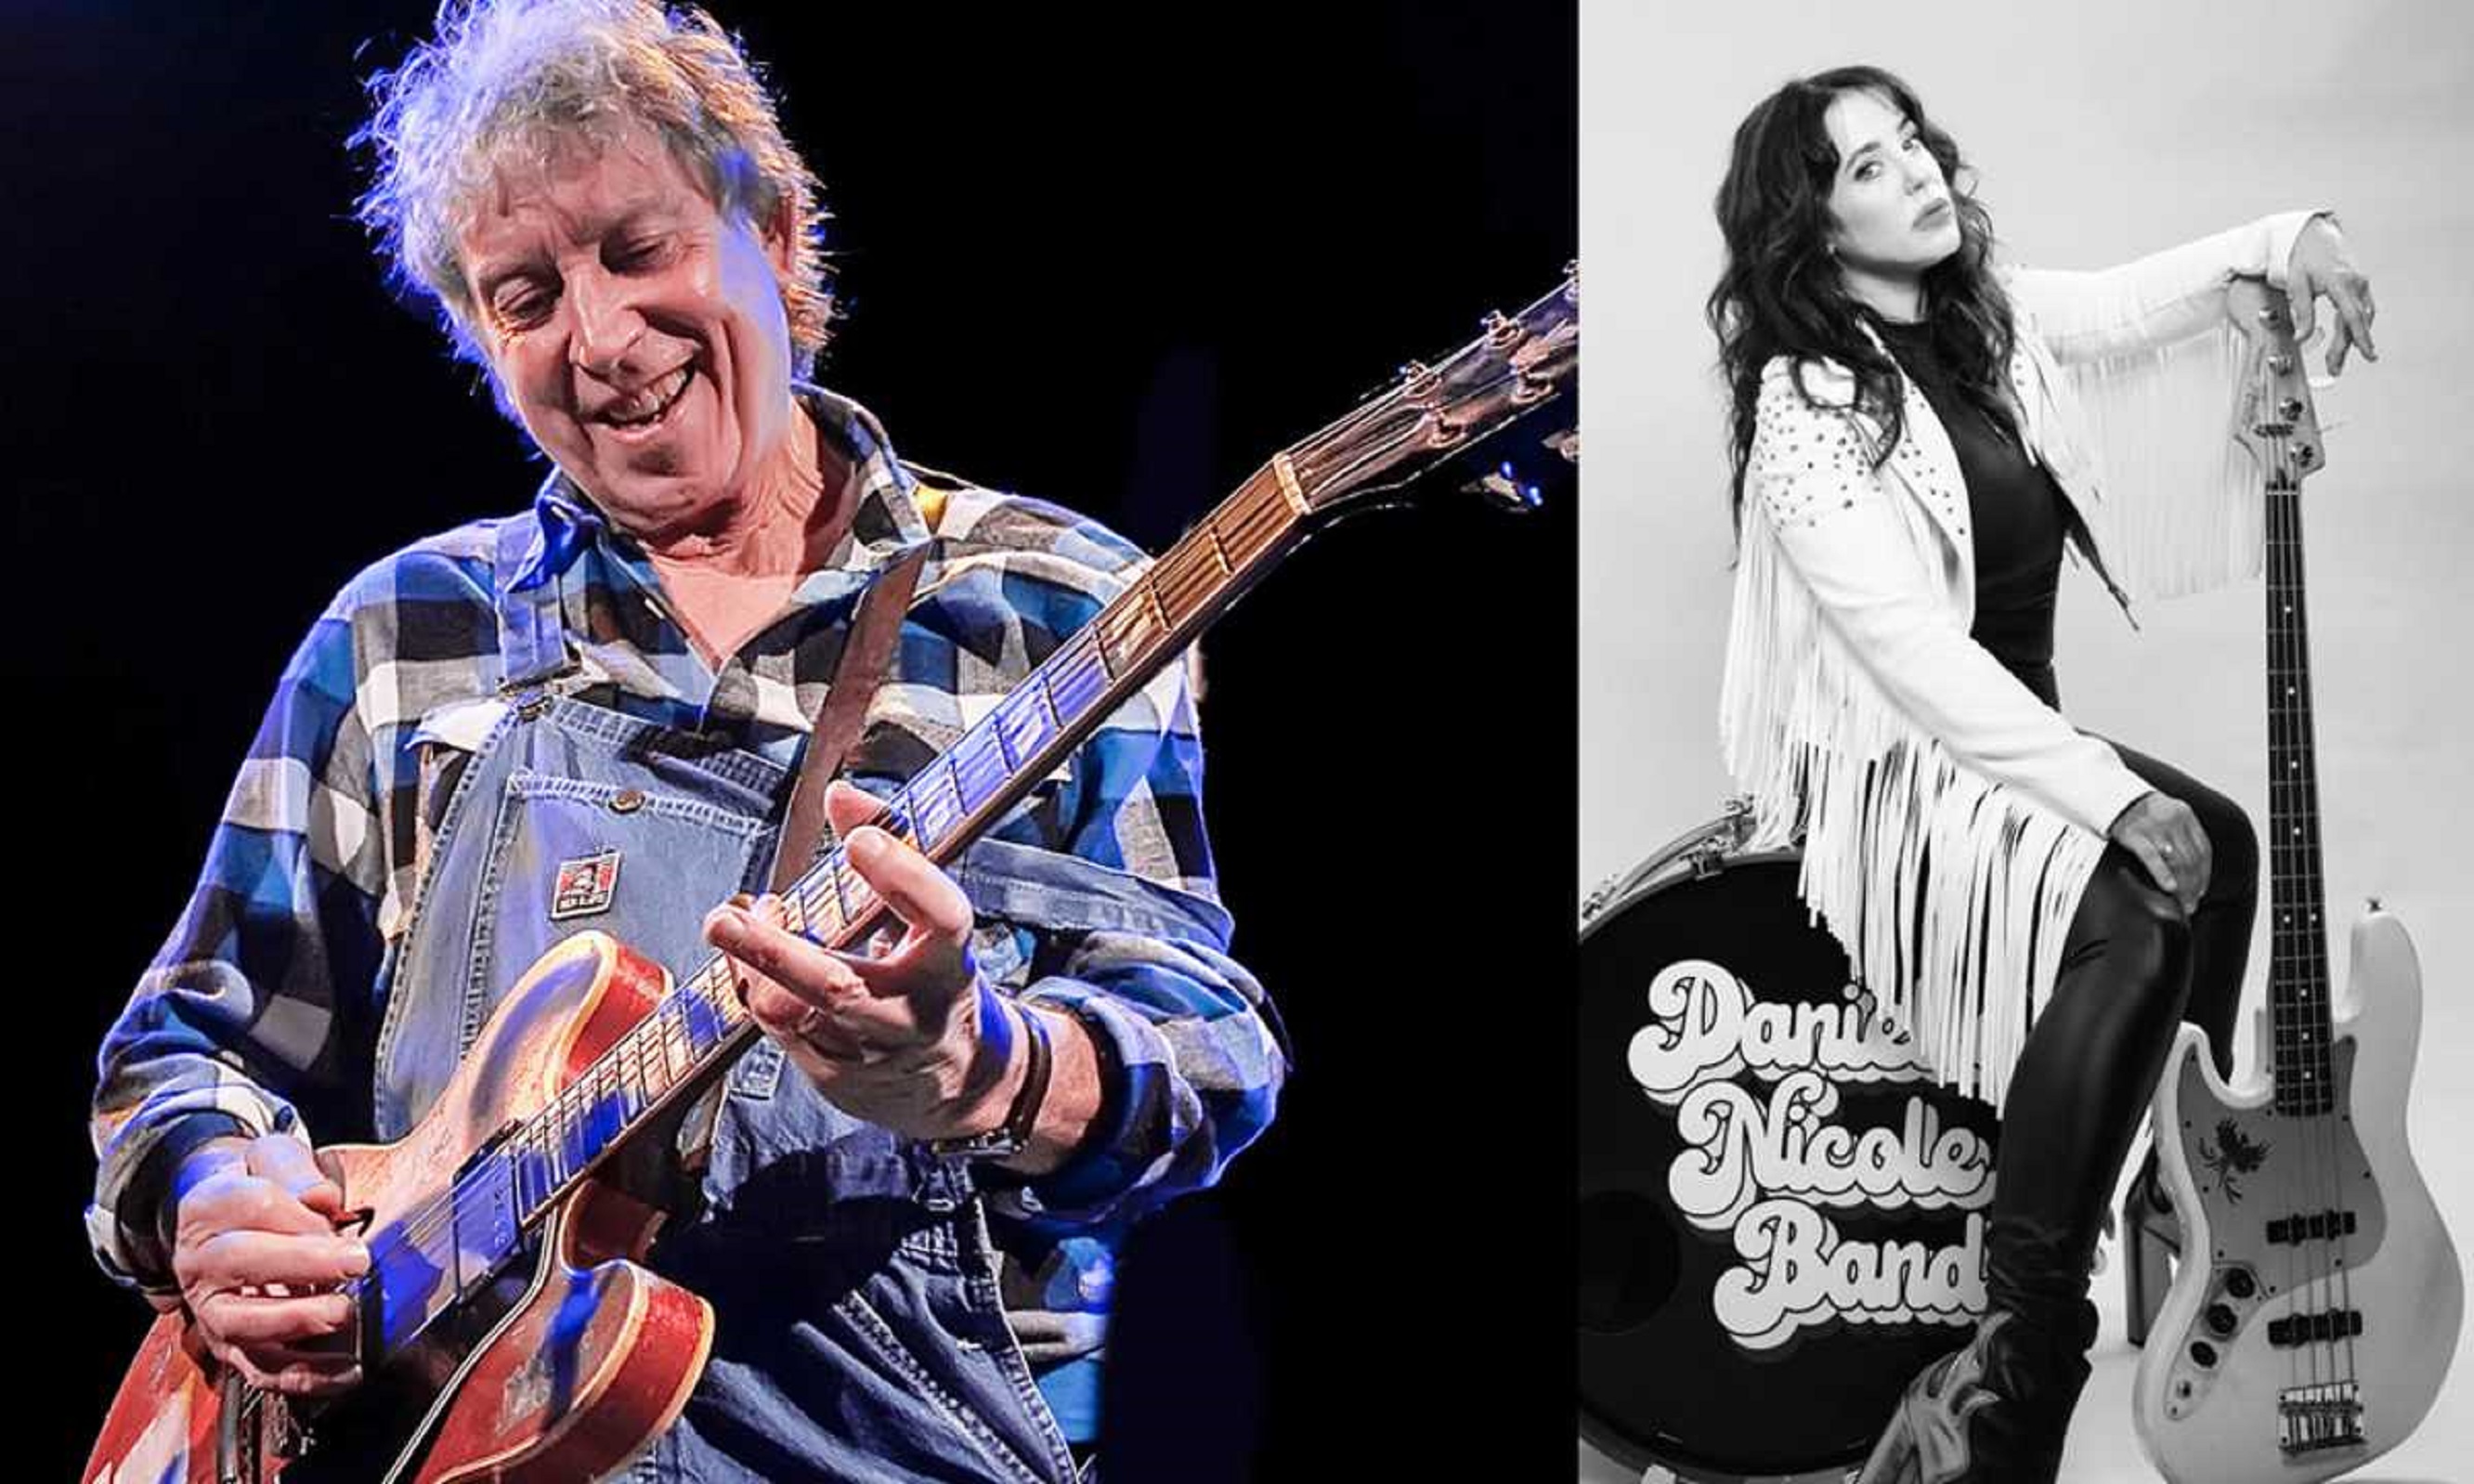 ELVIN BISHOP & DANIELLE NICOLE - LIVE FROM CAIN’S 6/23